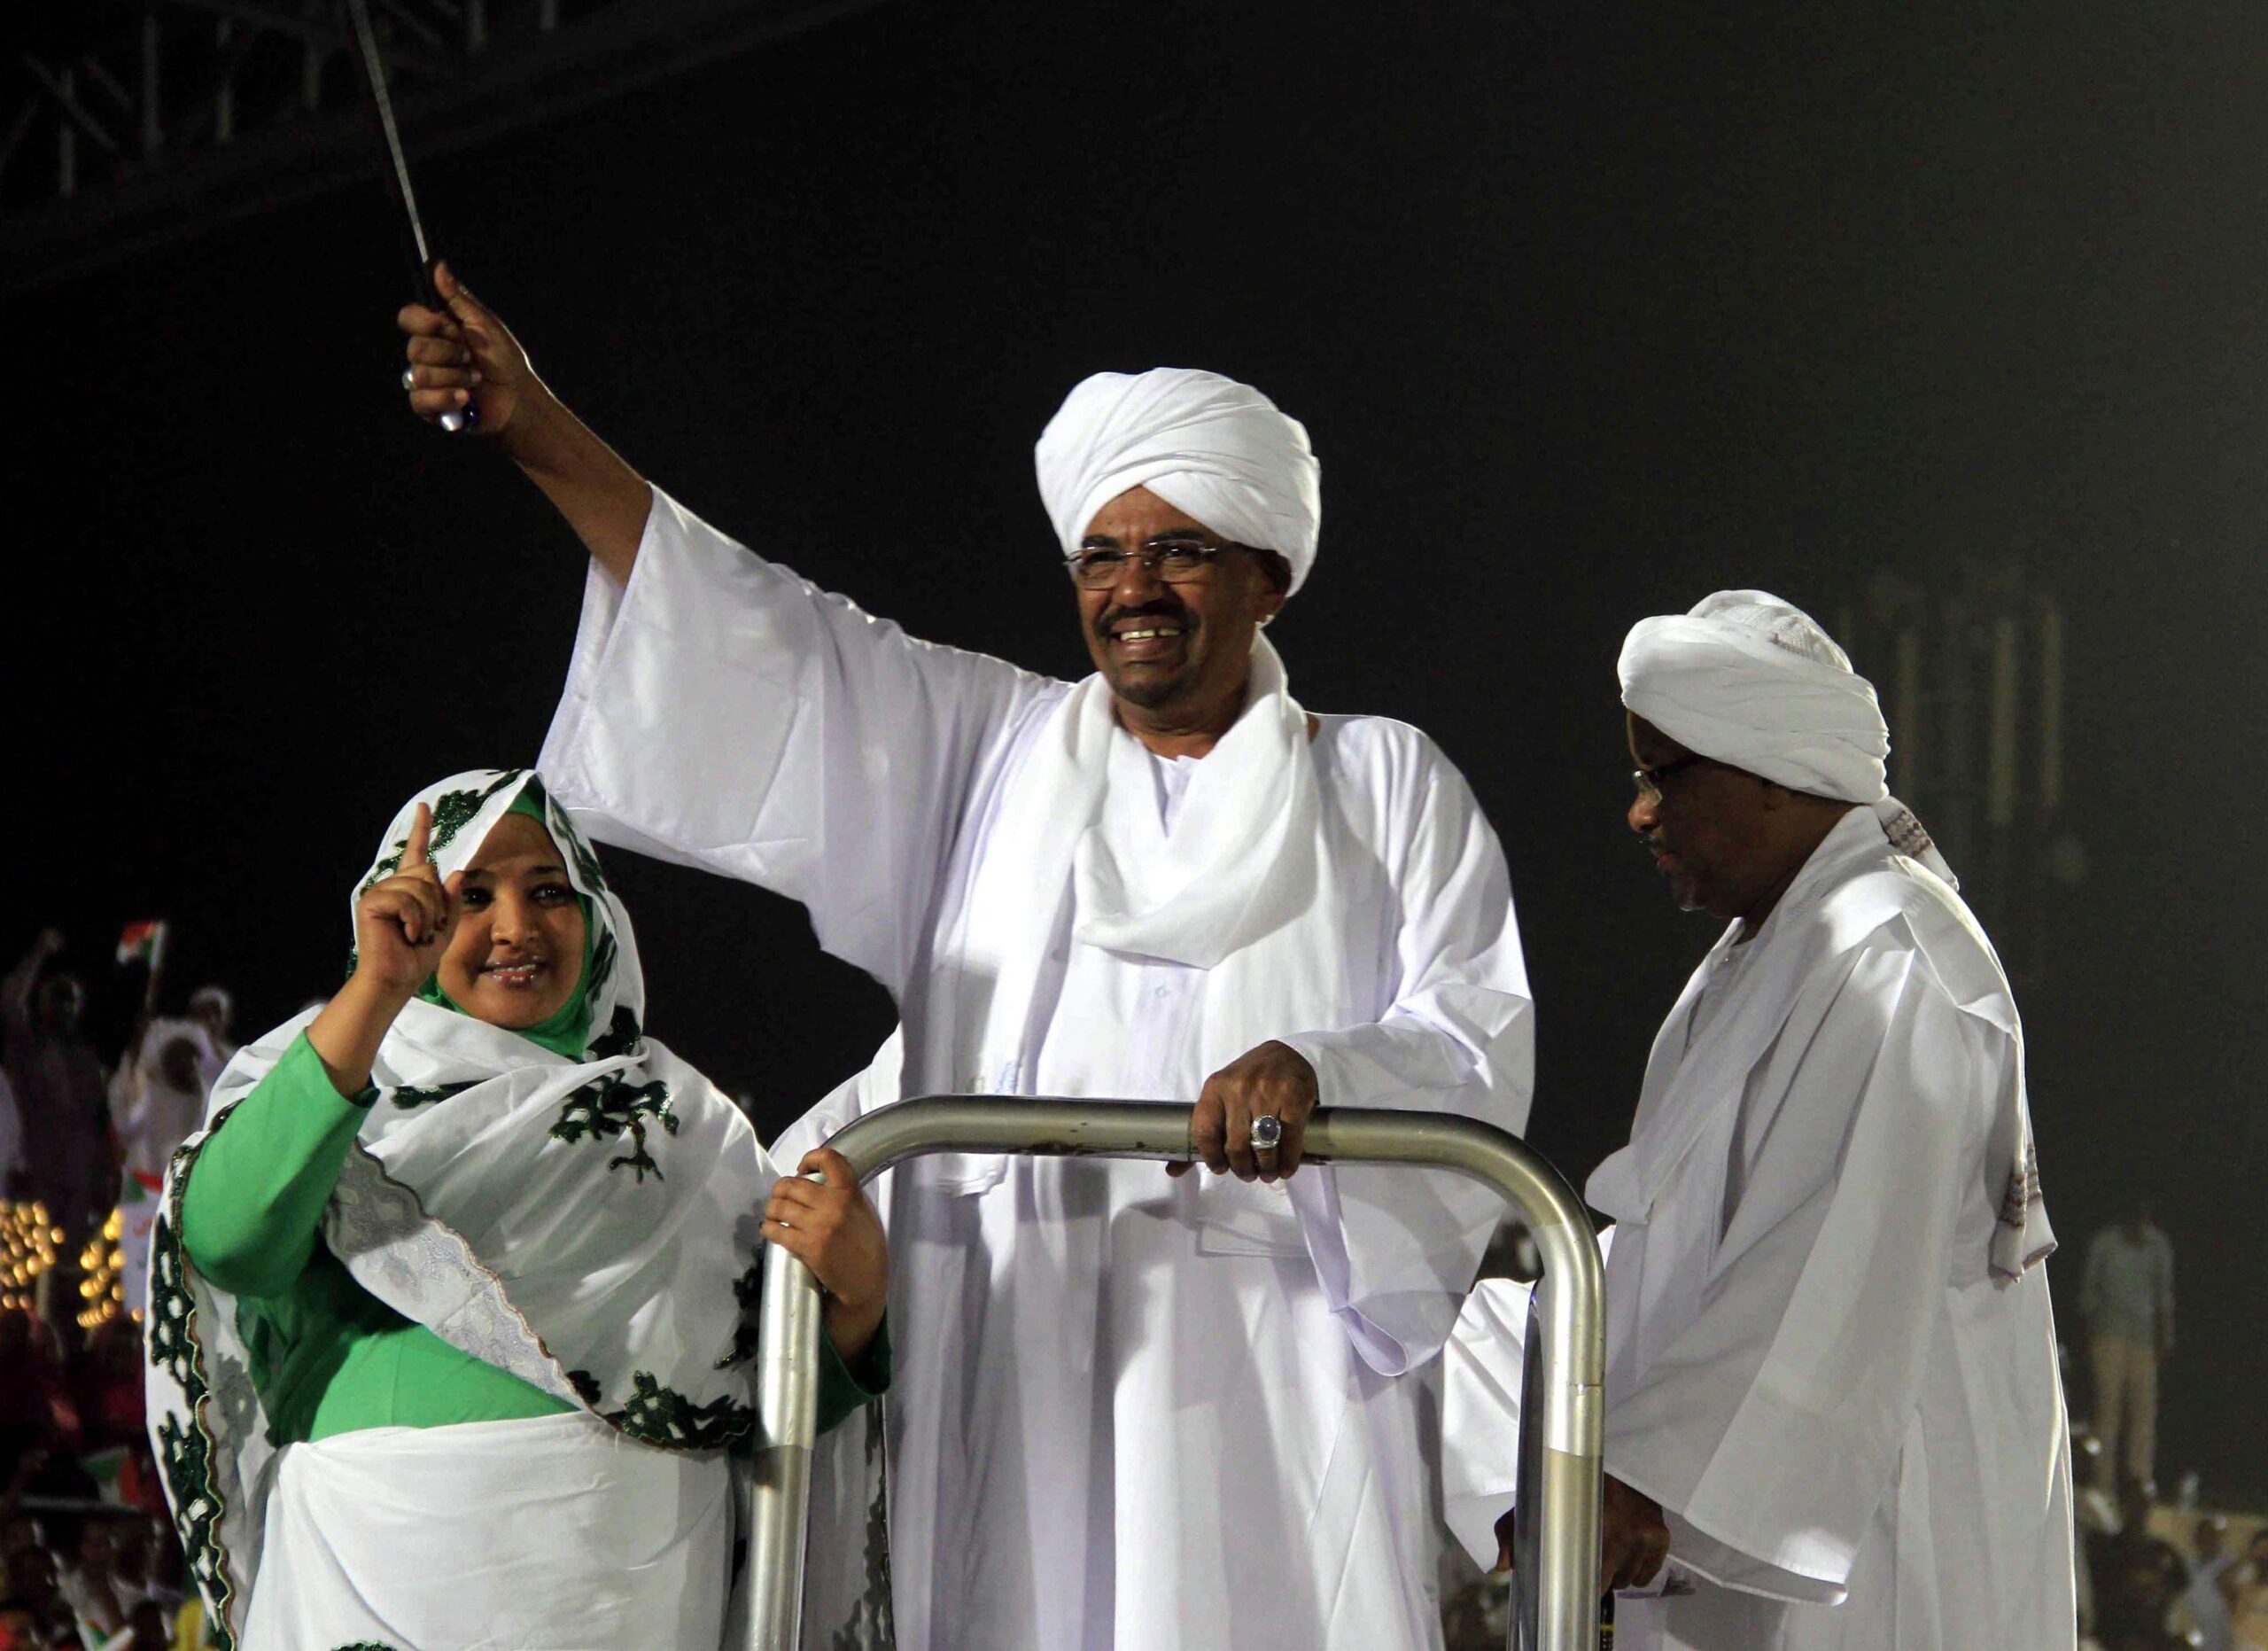 Sudan’s Bashir reelected with 94.5% of vote